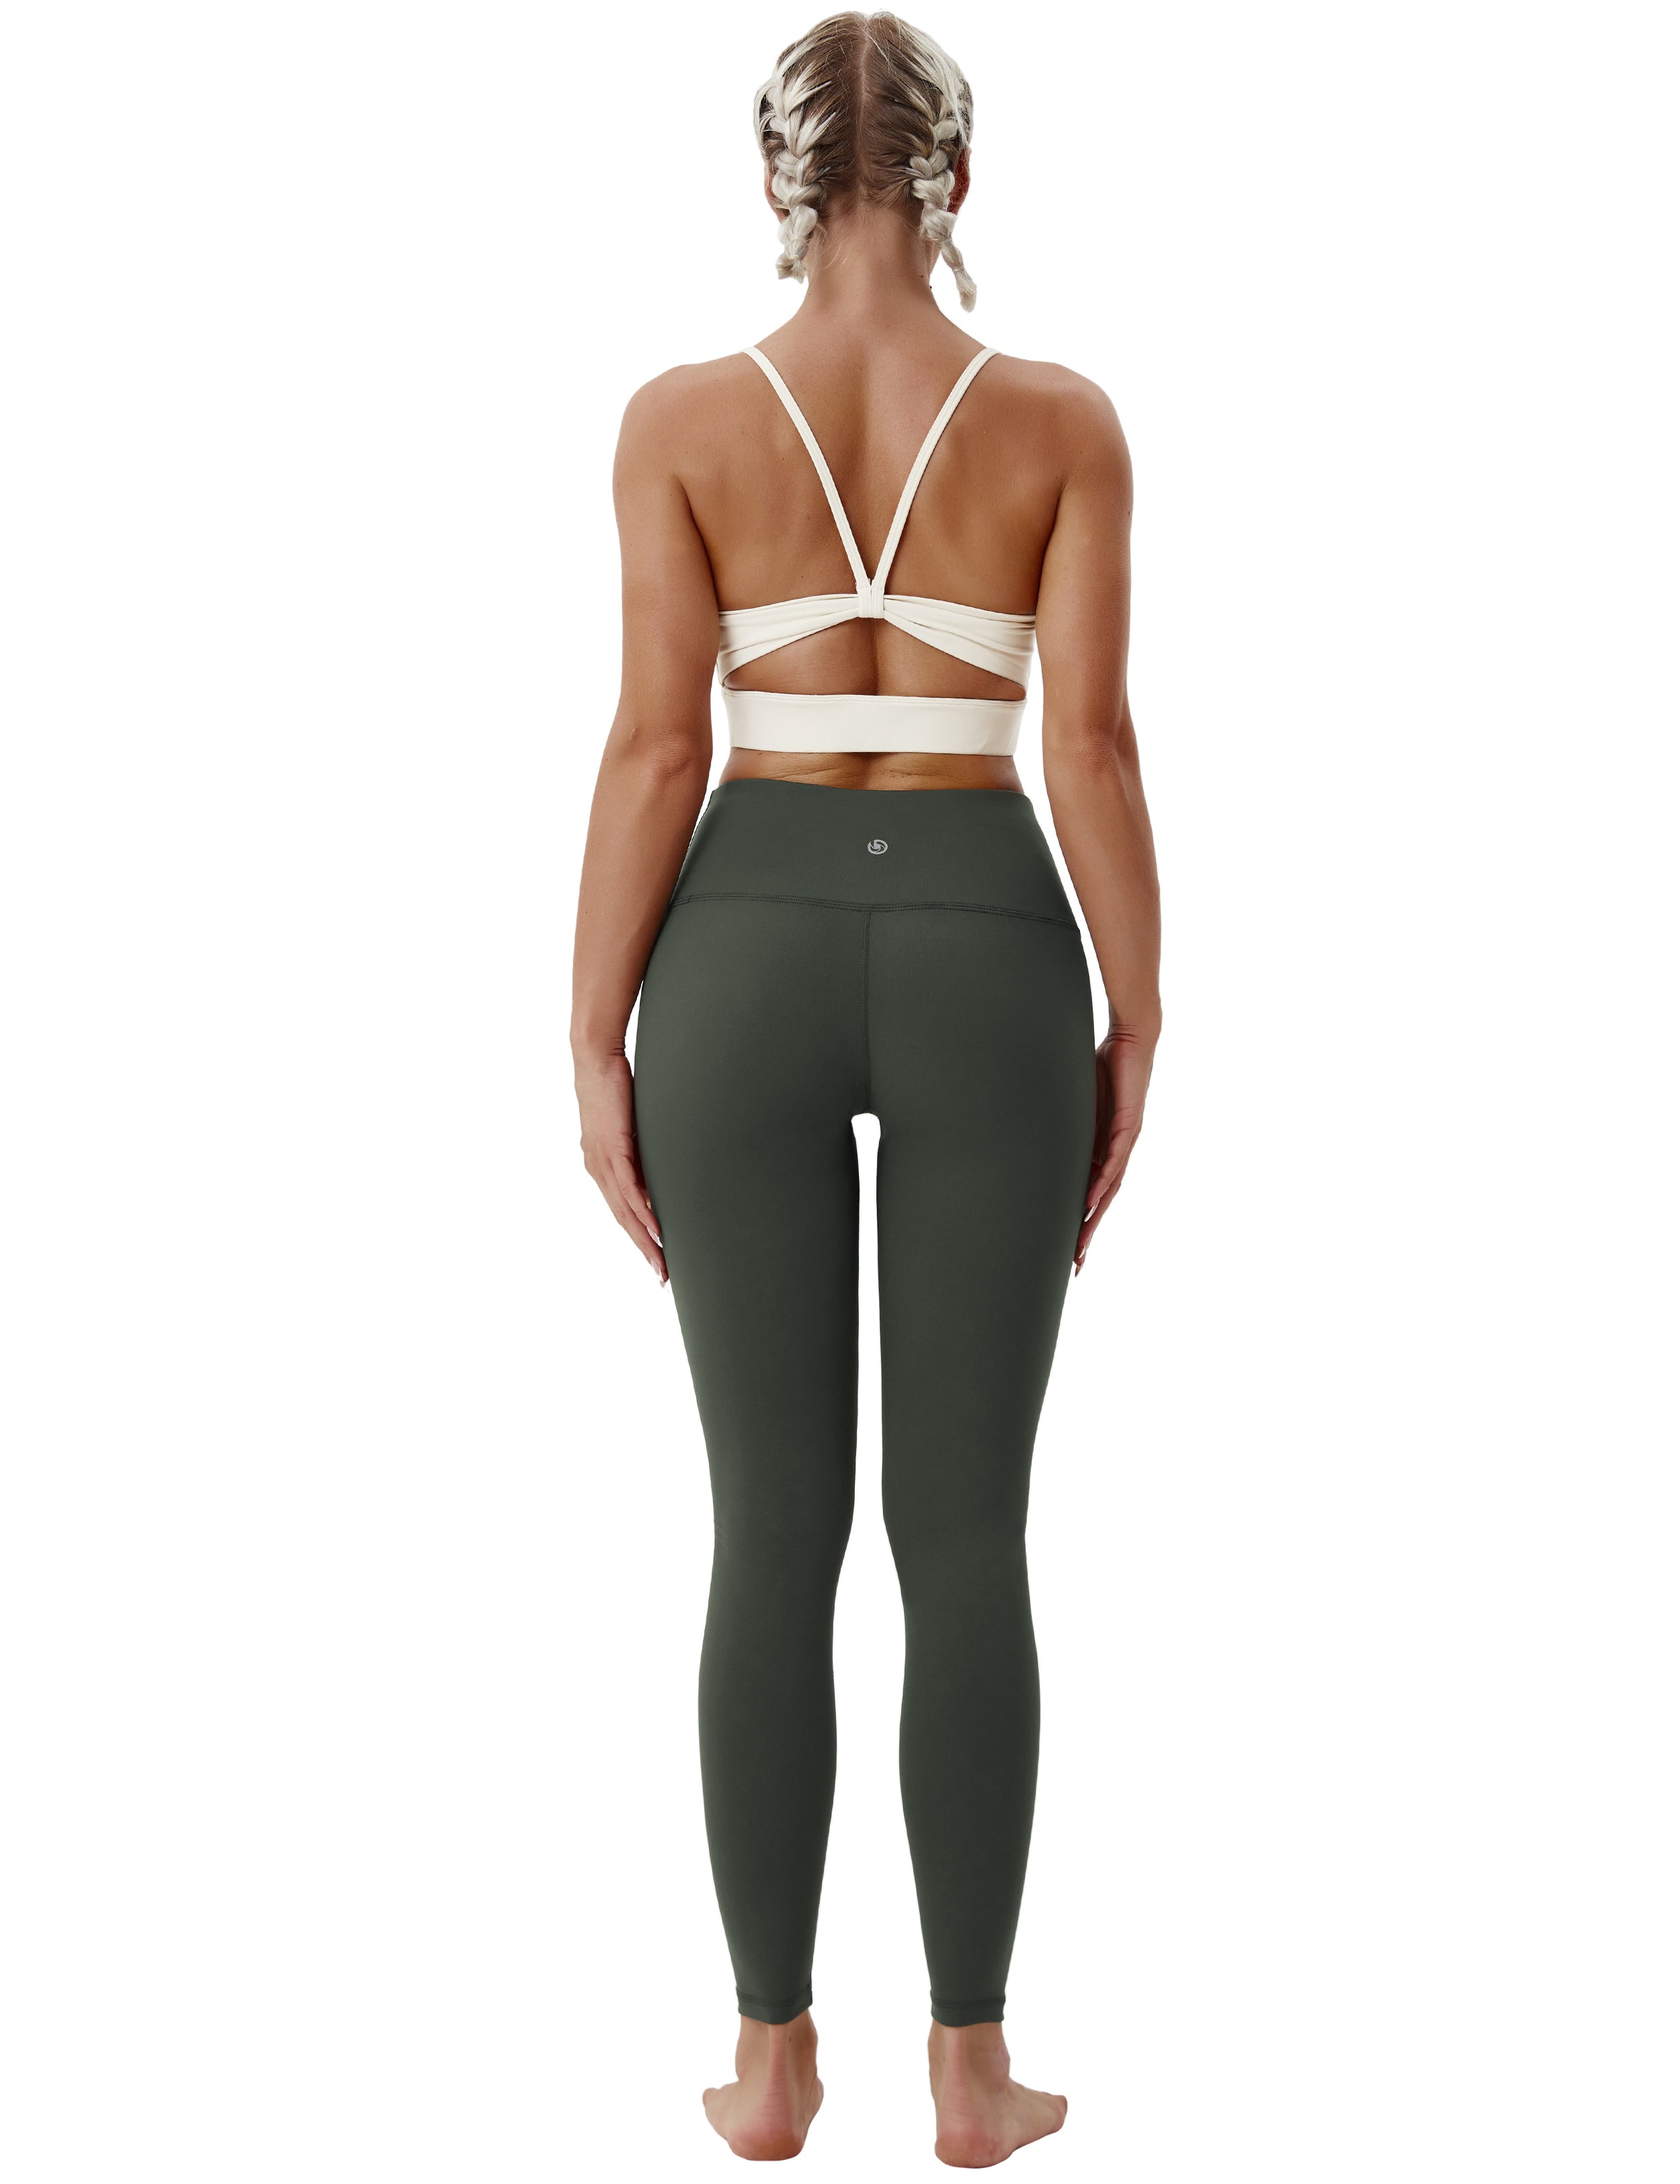 High Waist Biking Pants olivegray 75%Nylon/25%Spandex Fabric doesn't attract lint easily 4-way stretch No see-through Moisture-wicking Tummy control Inner pocket Four lengths